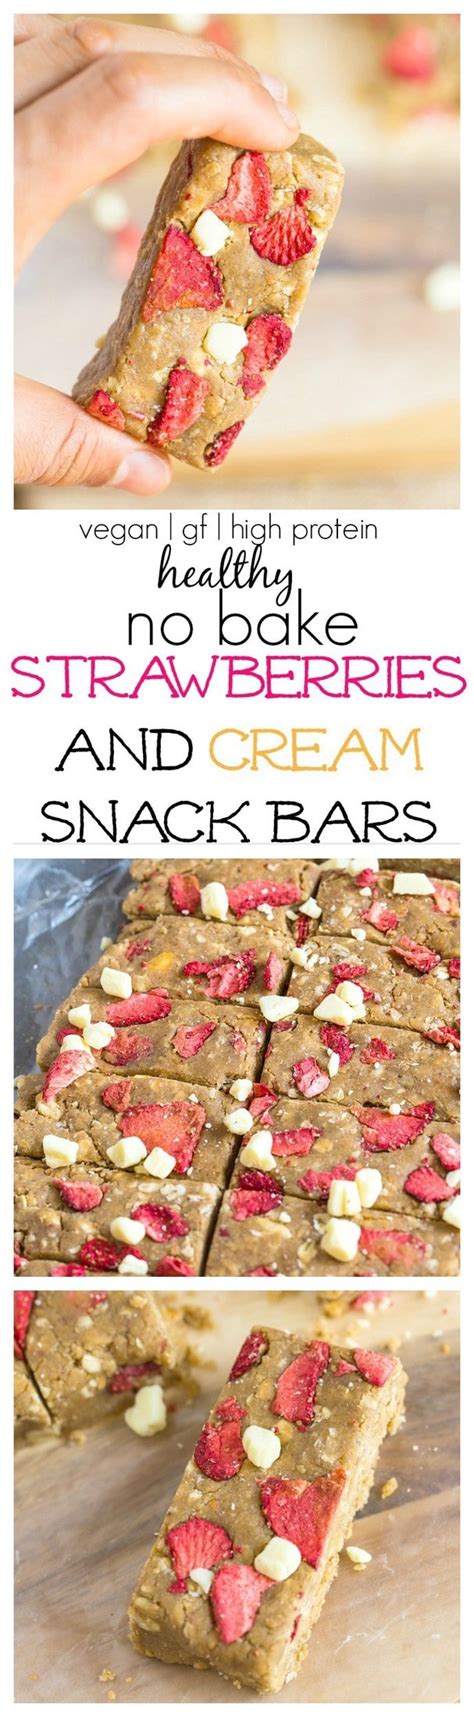 At first glance, traditional chocolate no bake recipes—made with wholesome oatmeal instead of flour—might seem like a healthy choice. Healthy No Bake Strawberries and Cream Snack Bars